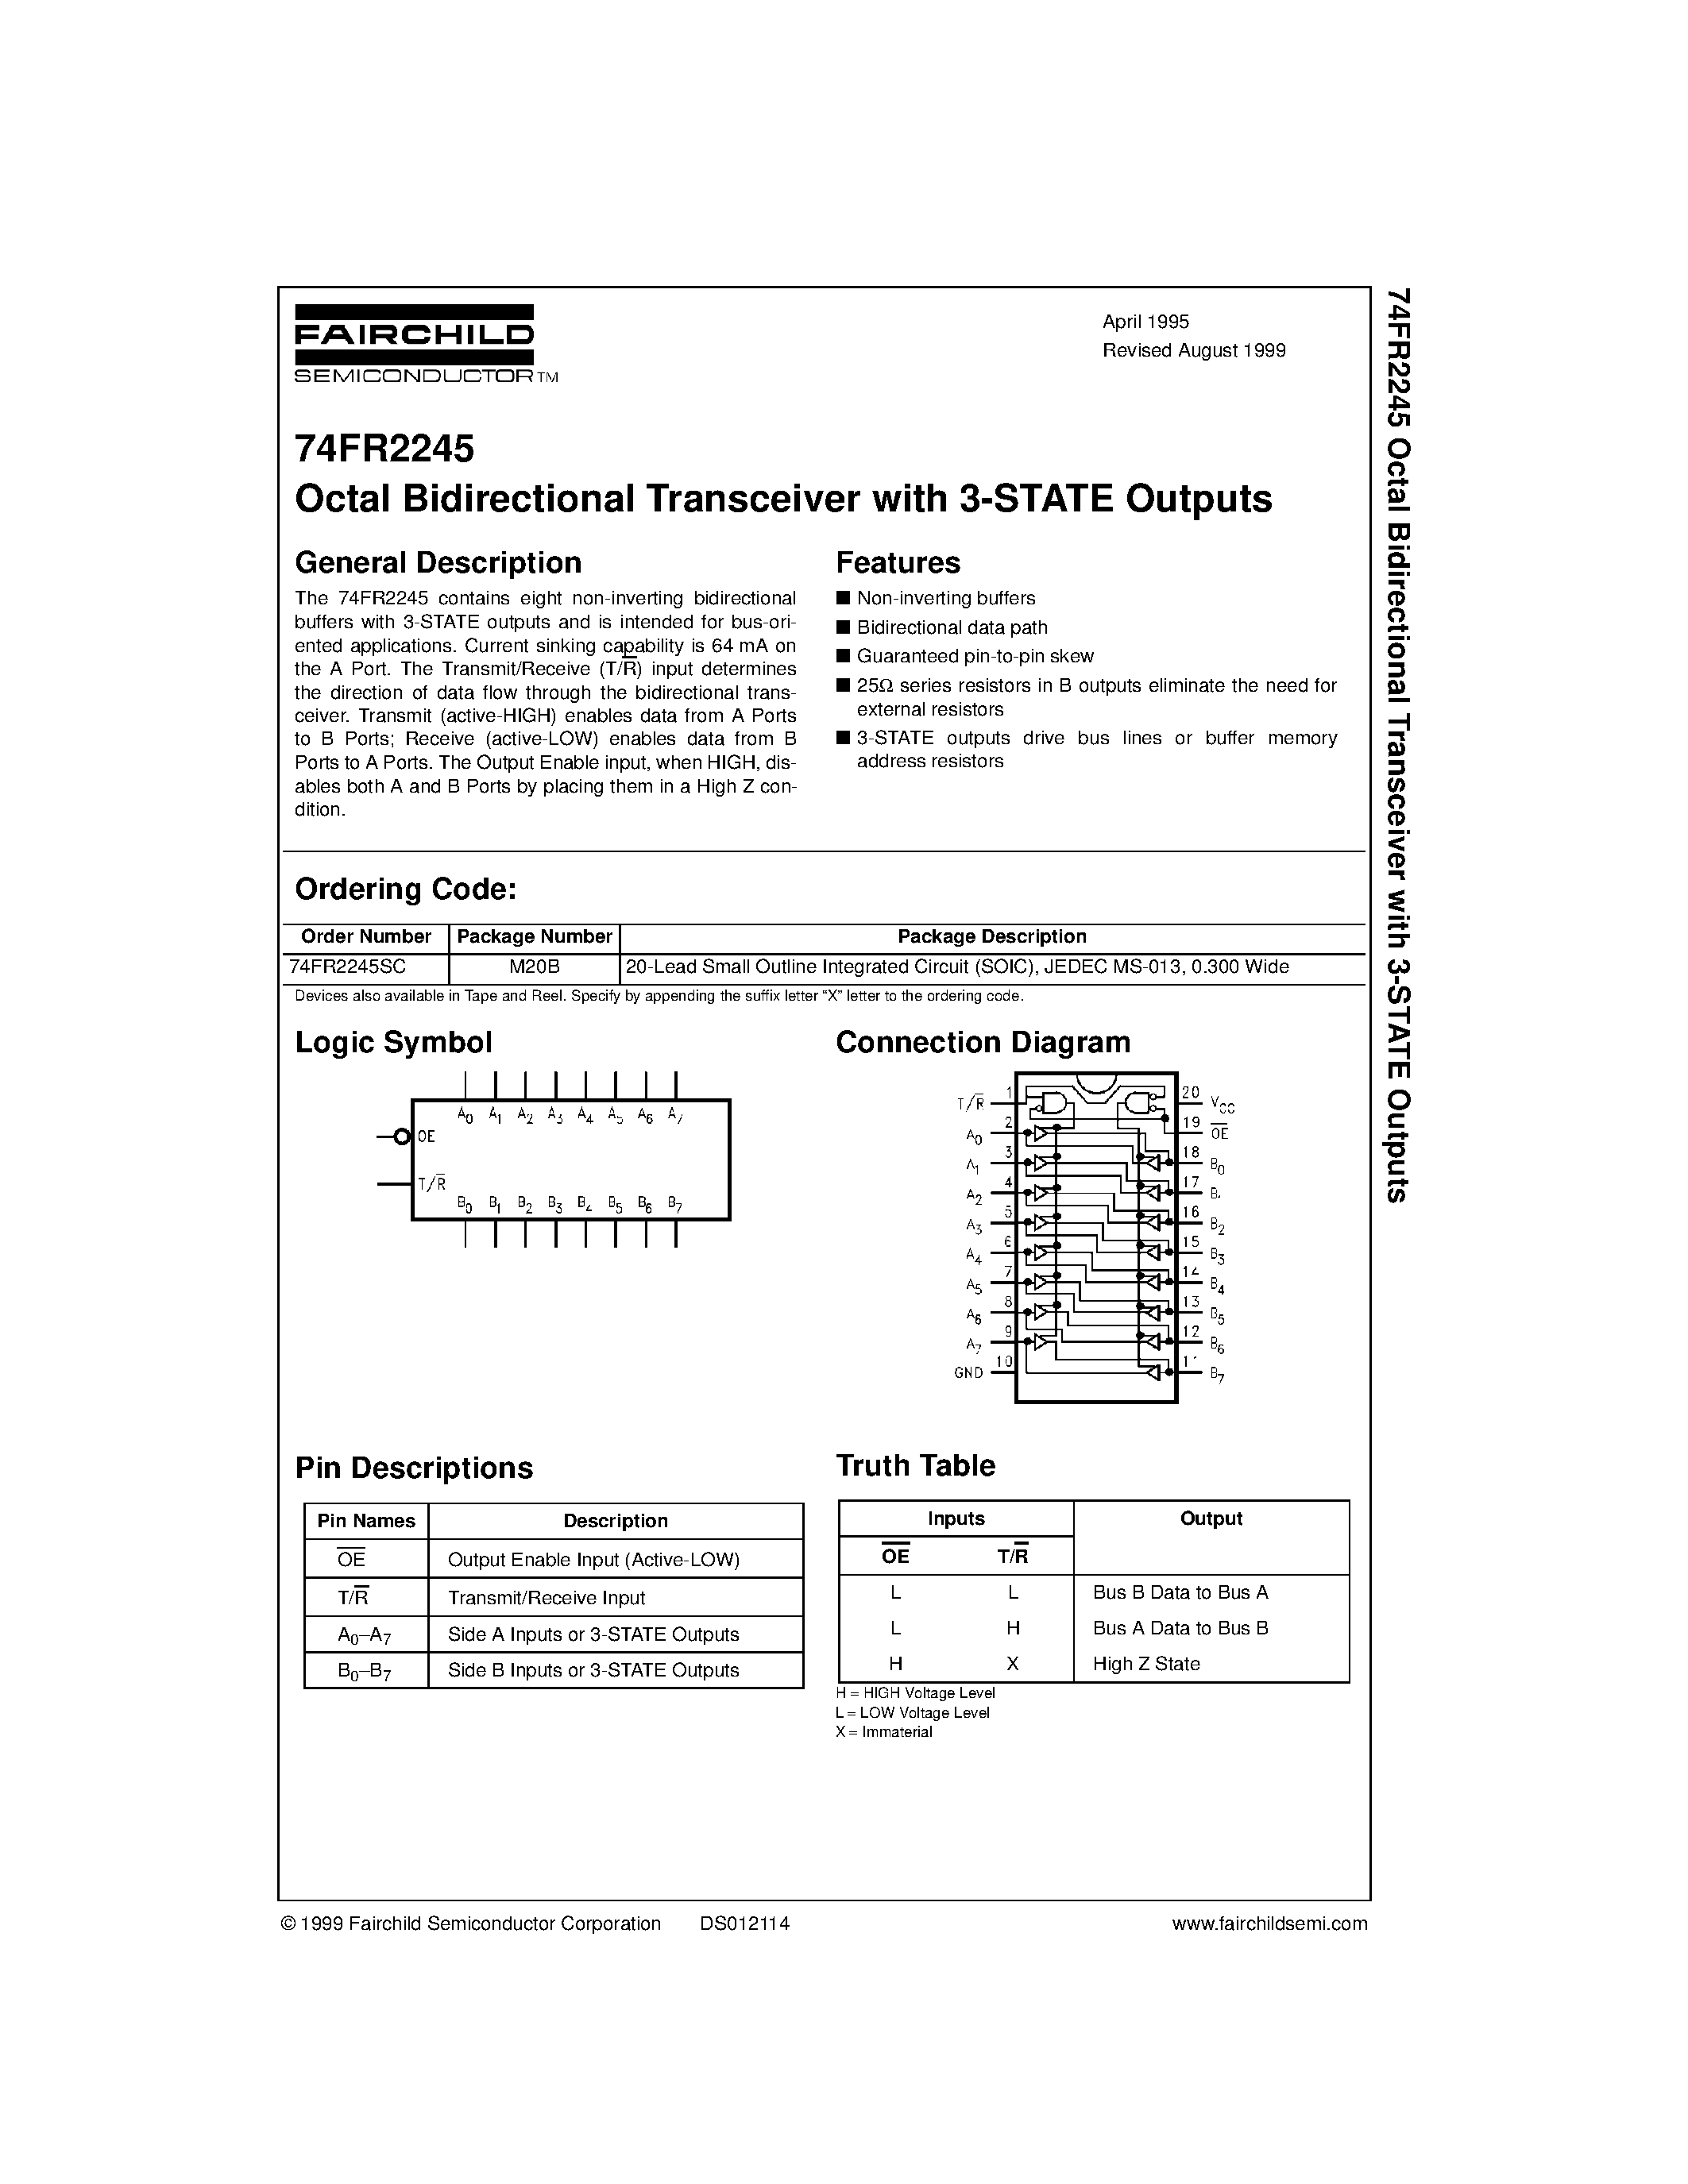 Datasheet 74FR2245 - Octal Bidirectional Transceiver with 3-STATE Outputs page 1